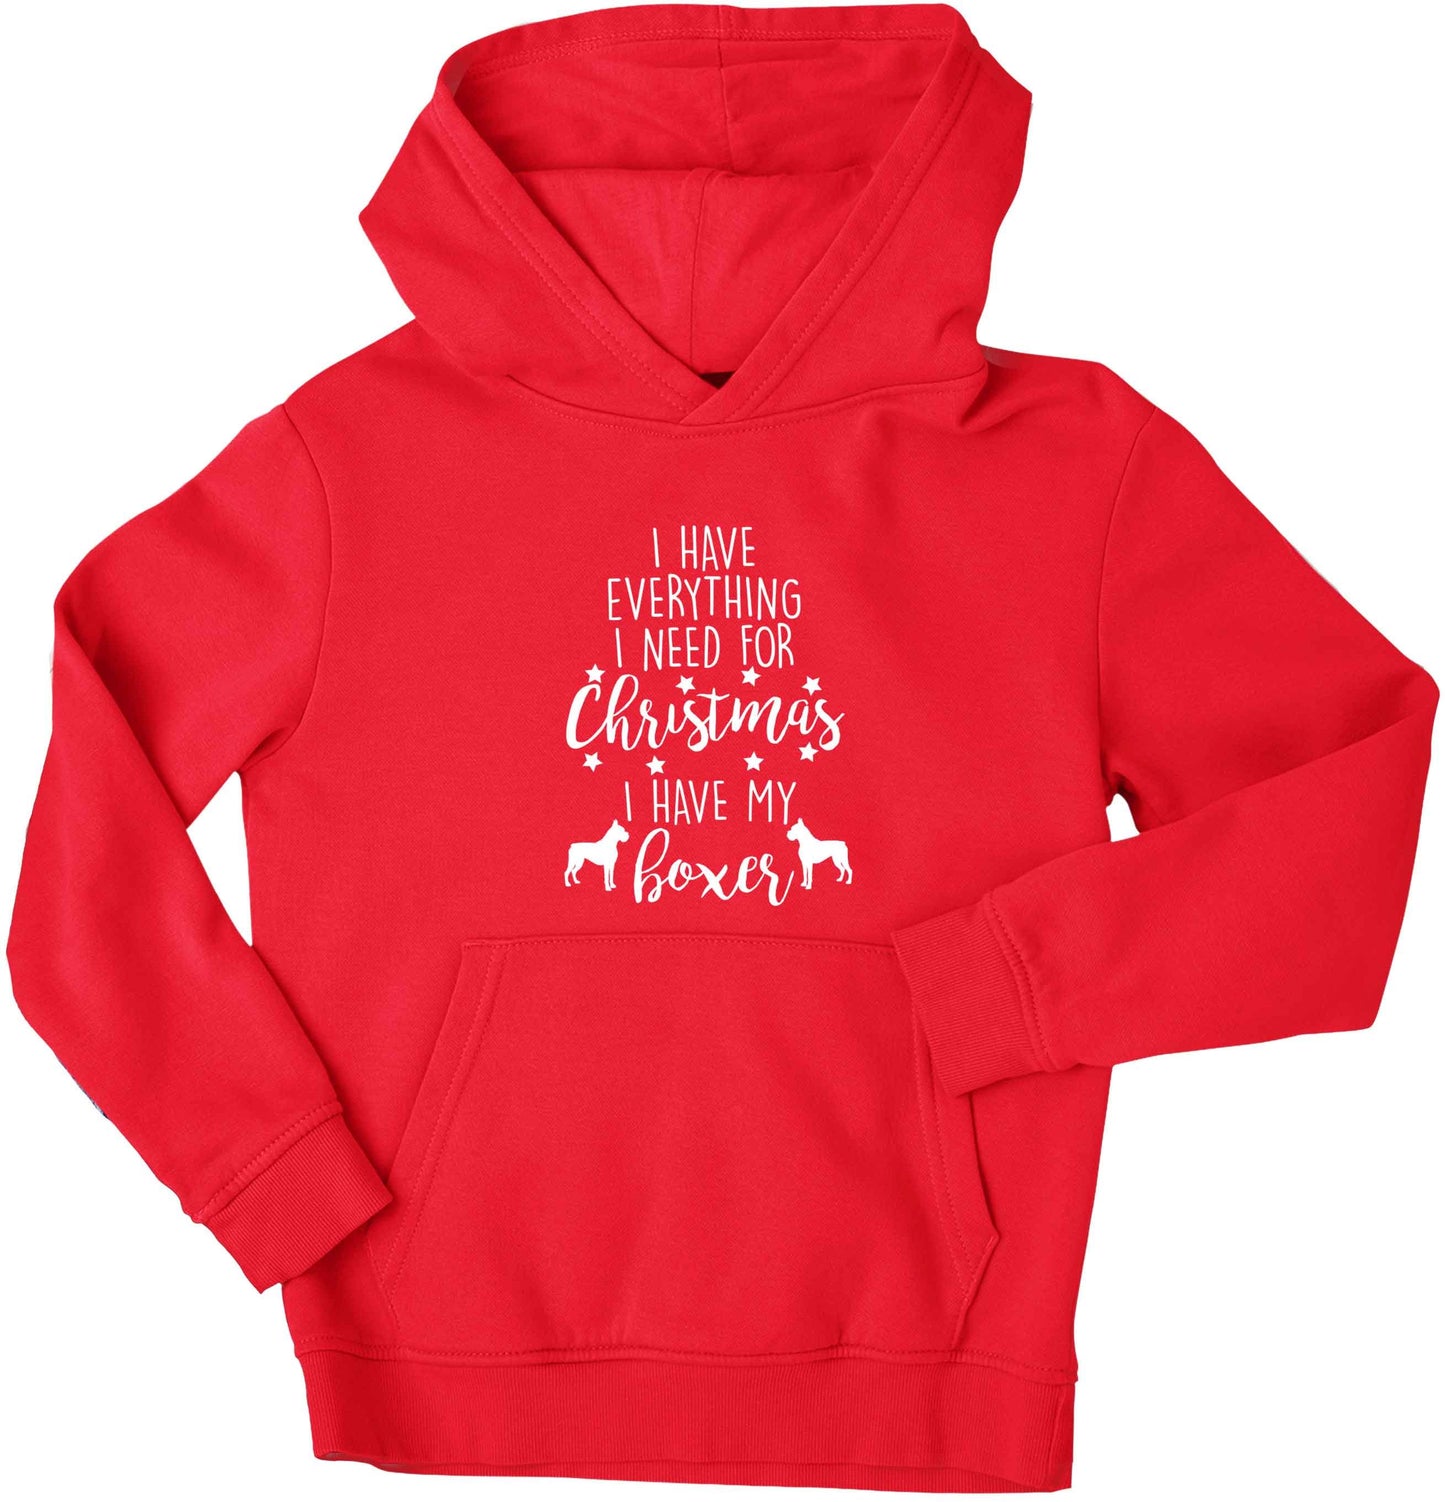 I have everything I need for Christmas I have my boxer children's red hoodie 12-13 Years